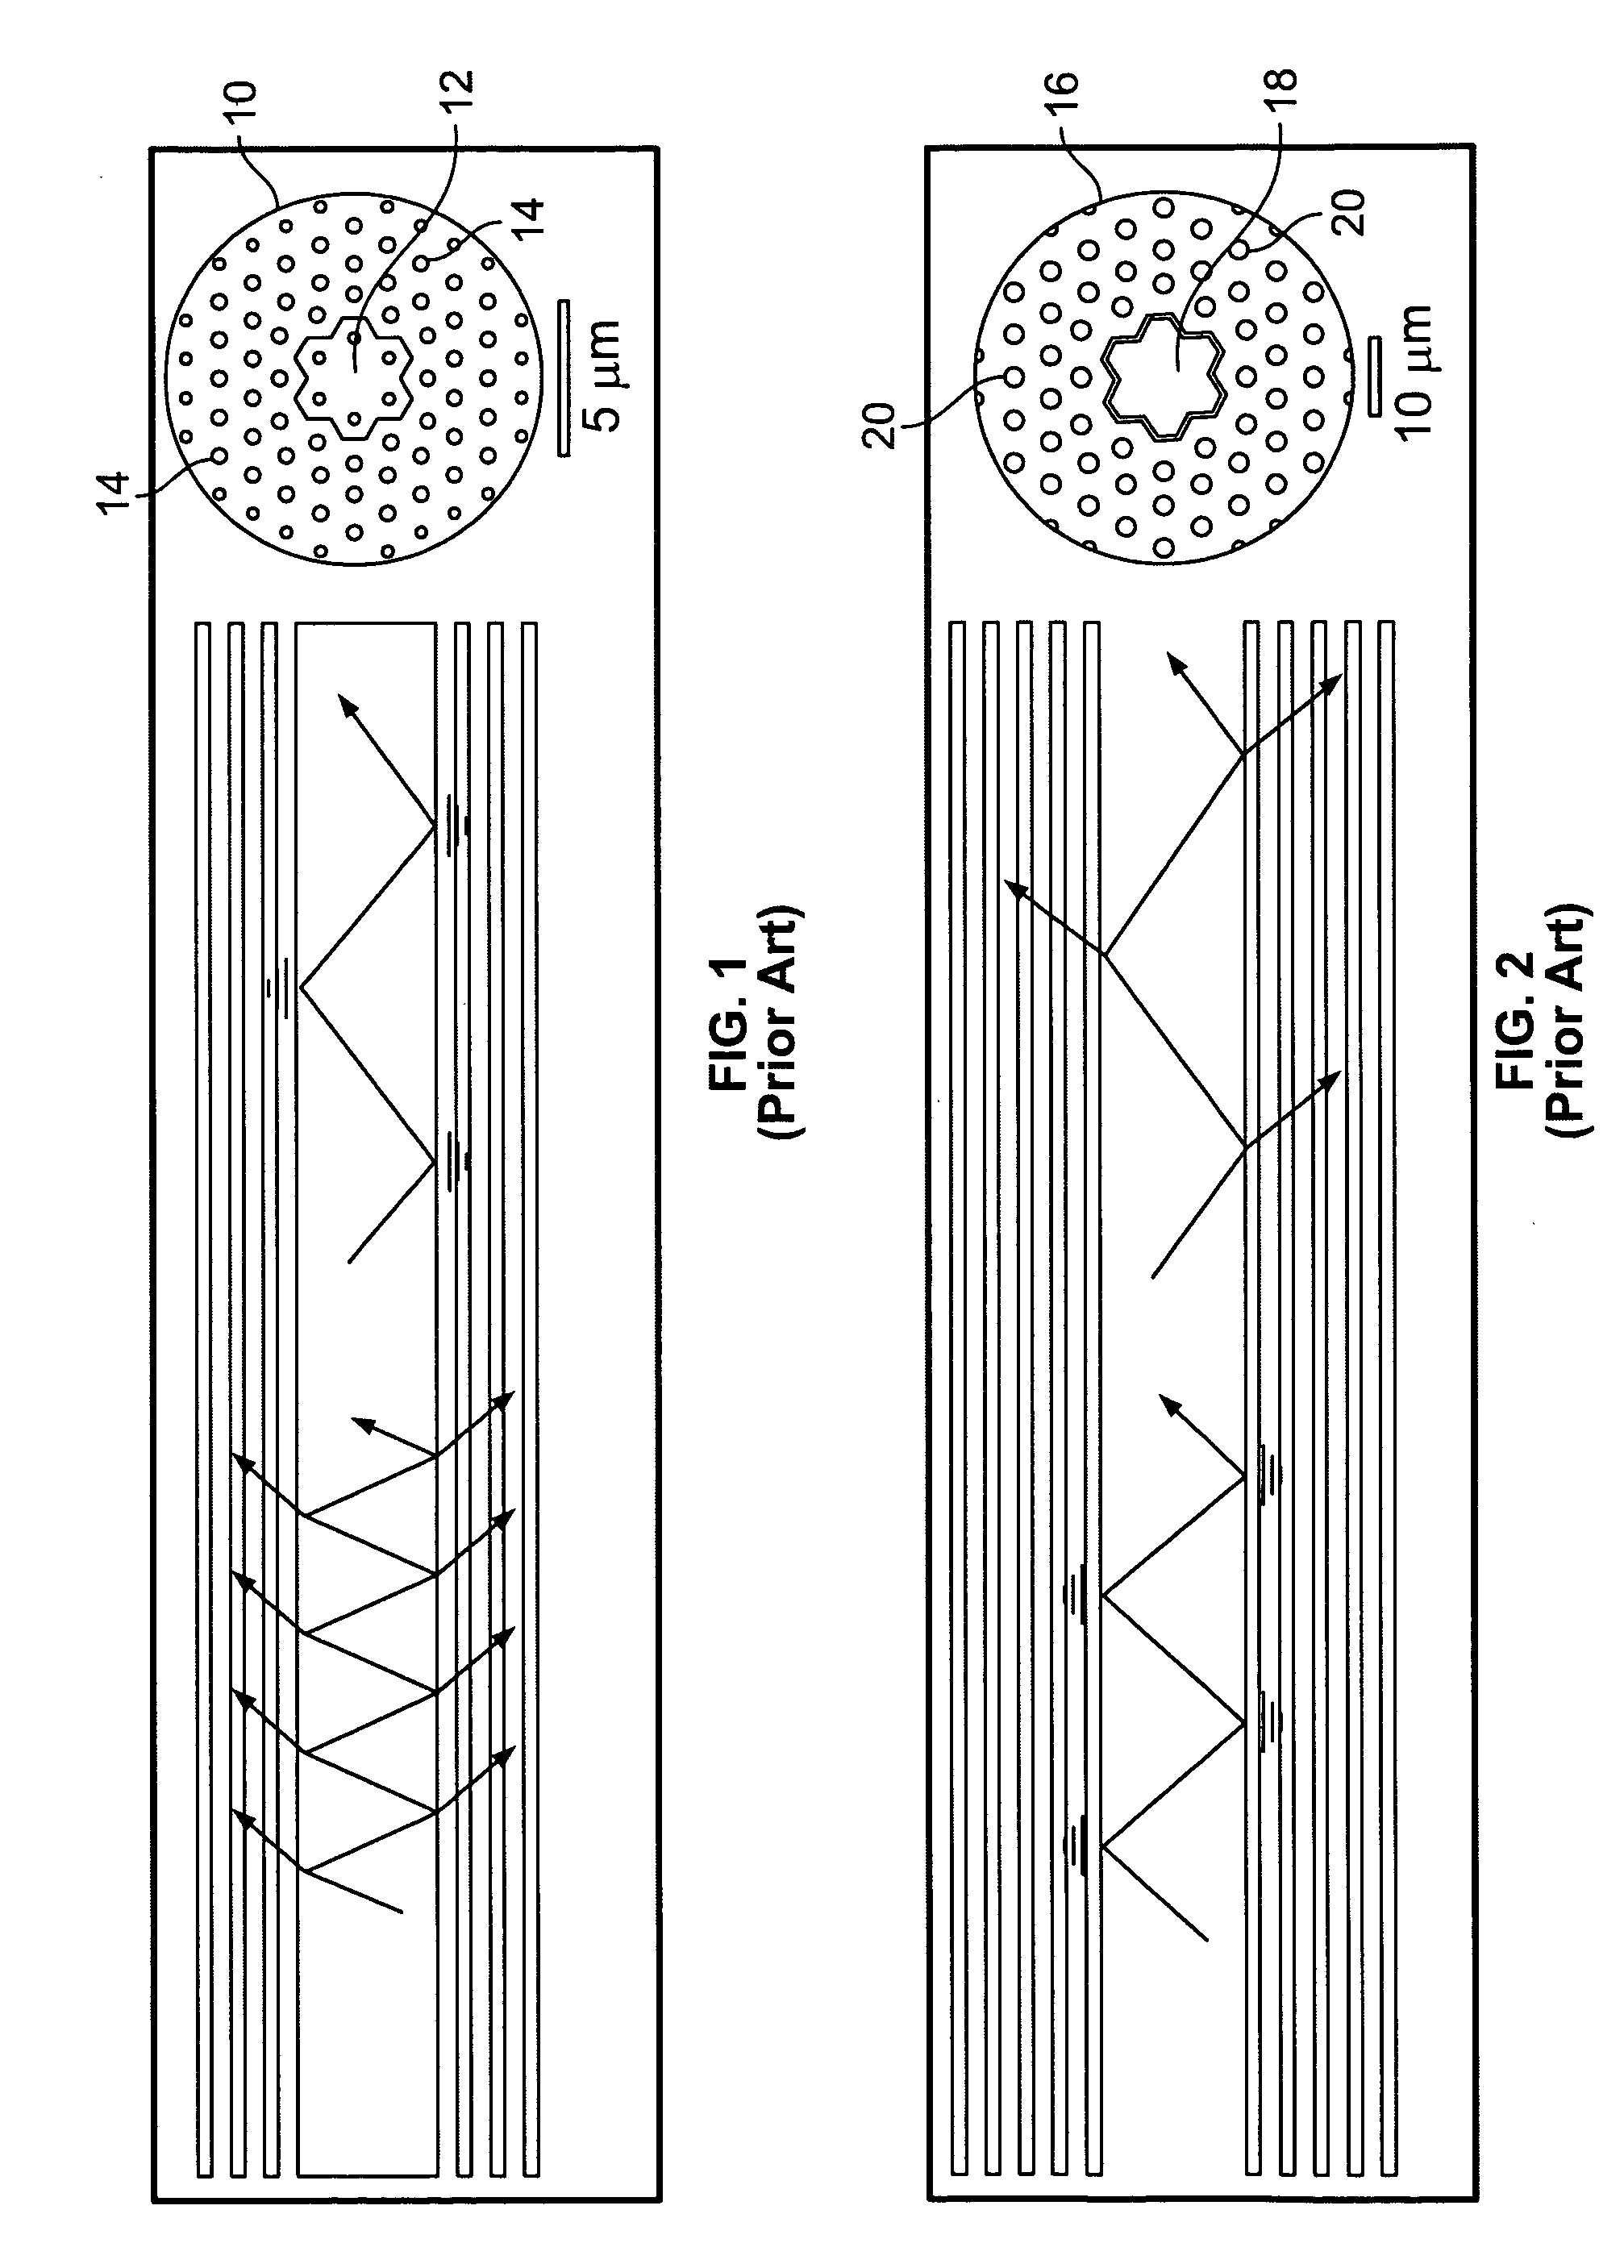 Functionalization of air hole arrays of photonic crystal fibers